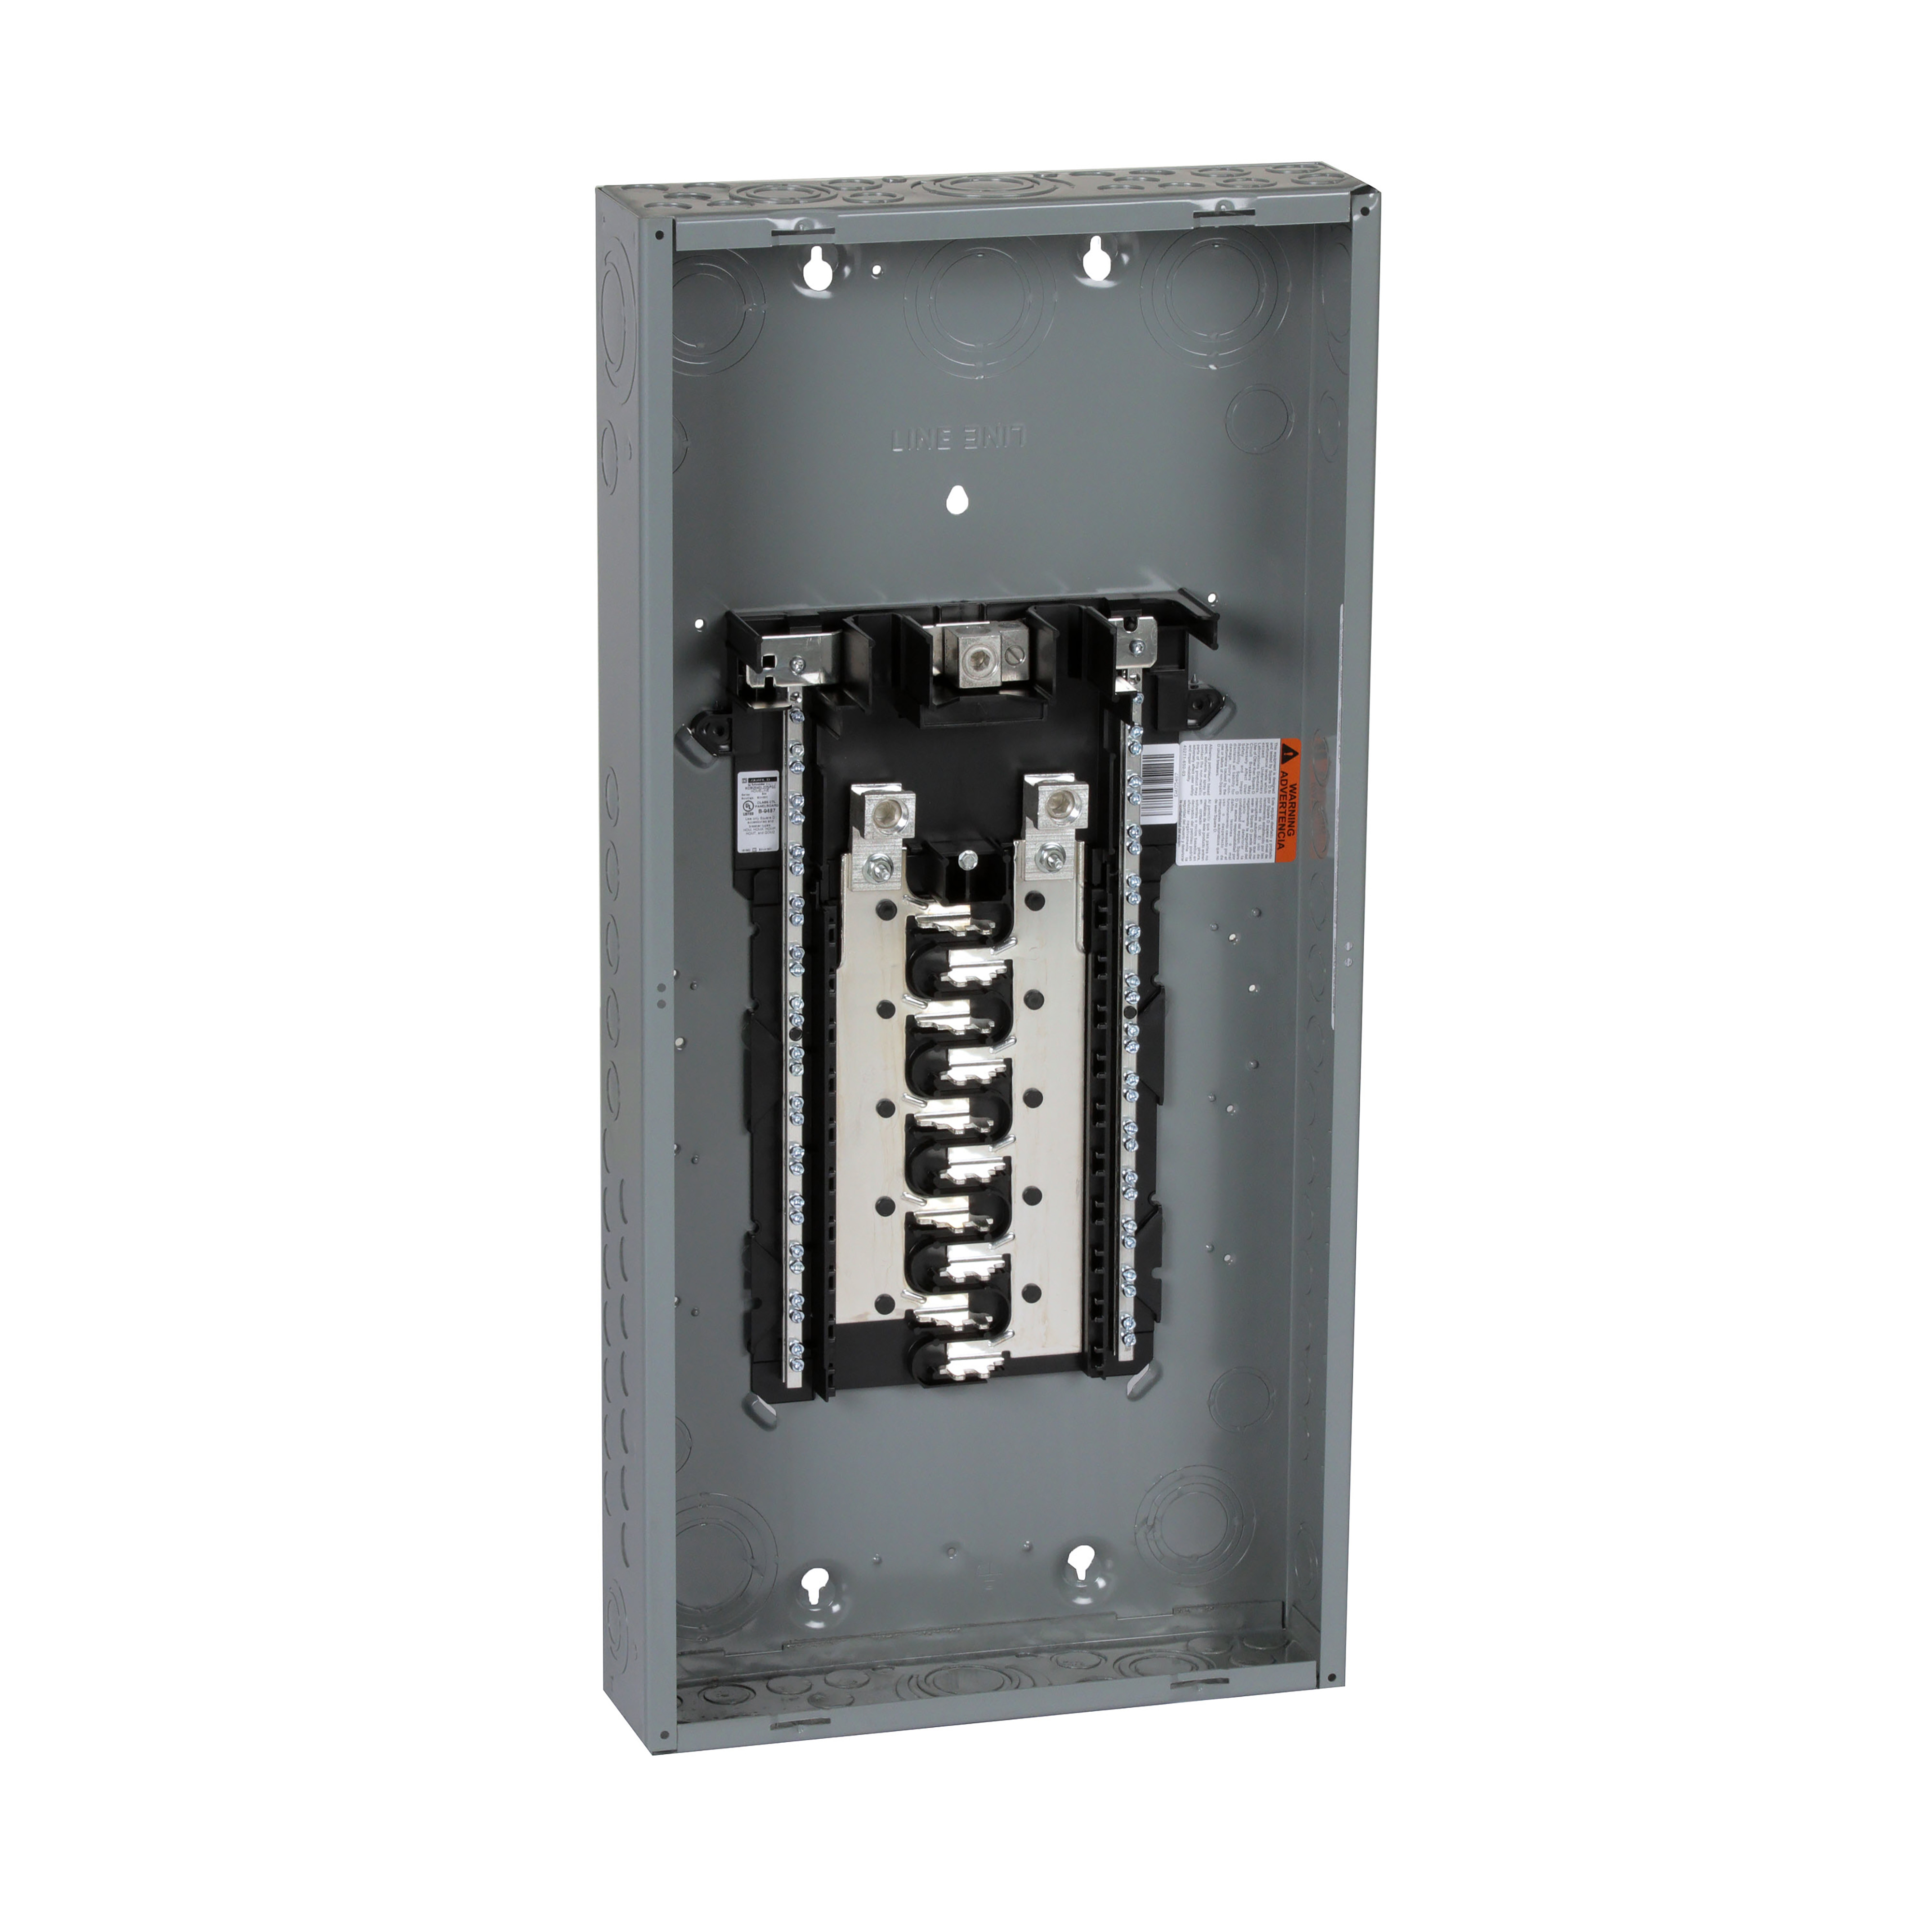 Load center, Homeline, 1 phase, 20 spaces, 40 circuits, 225A convertible main lugs, PoN, NEMA1, gnd bar, combo cover